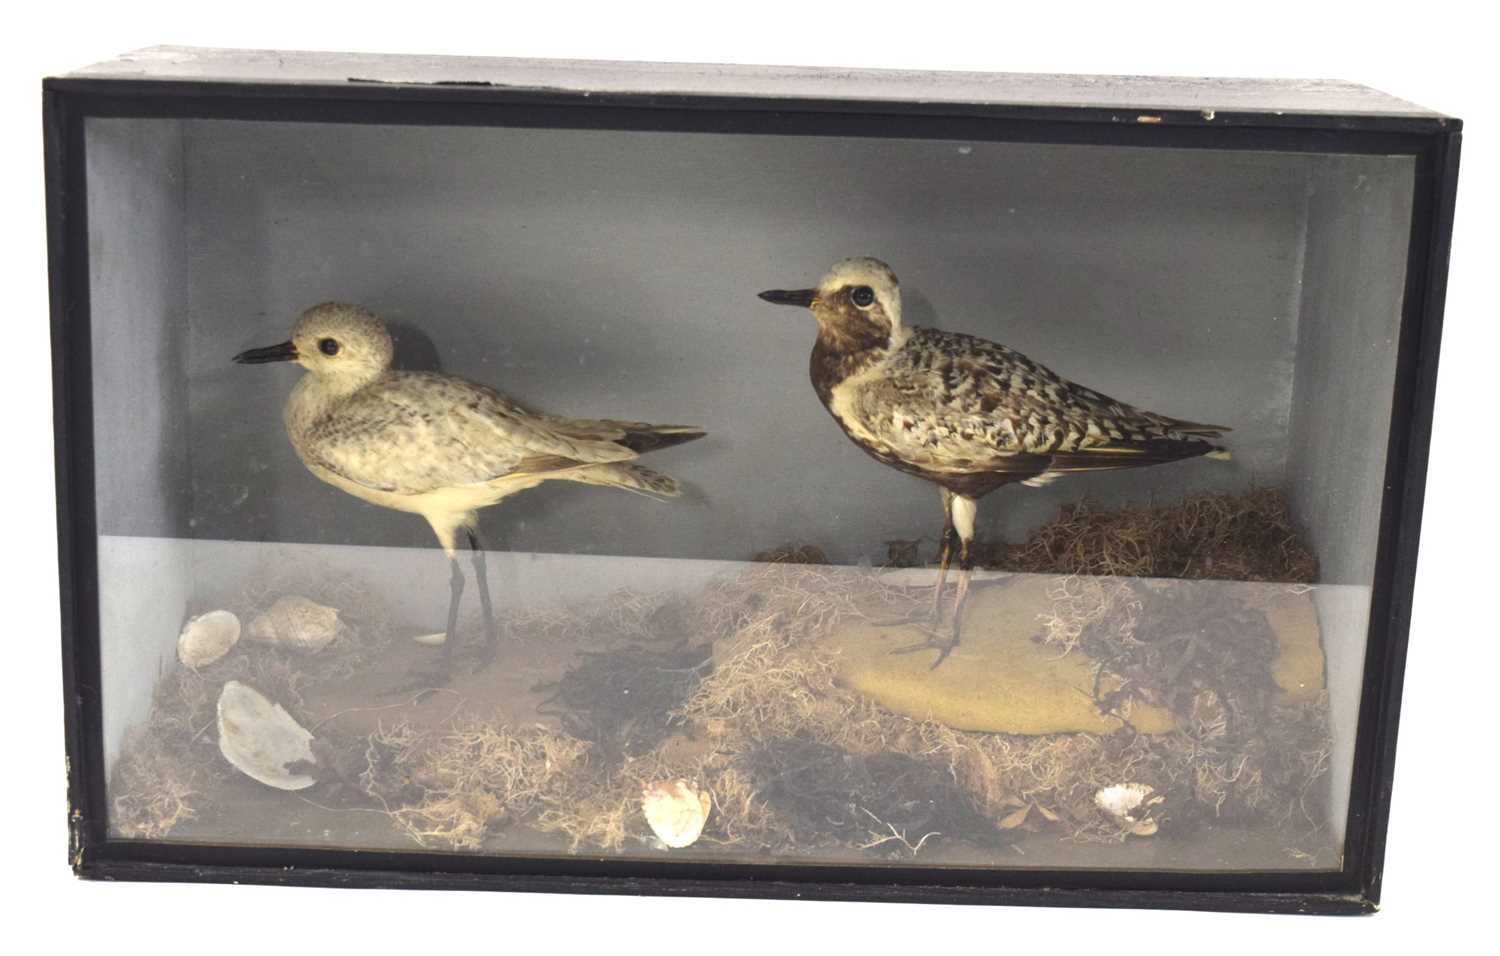 Victorian taxidermy cased pair of Common grey Plovers (Pluvialis squatarola) set in naturalistic